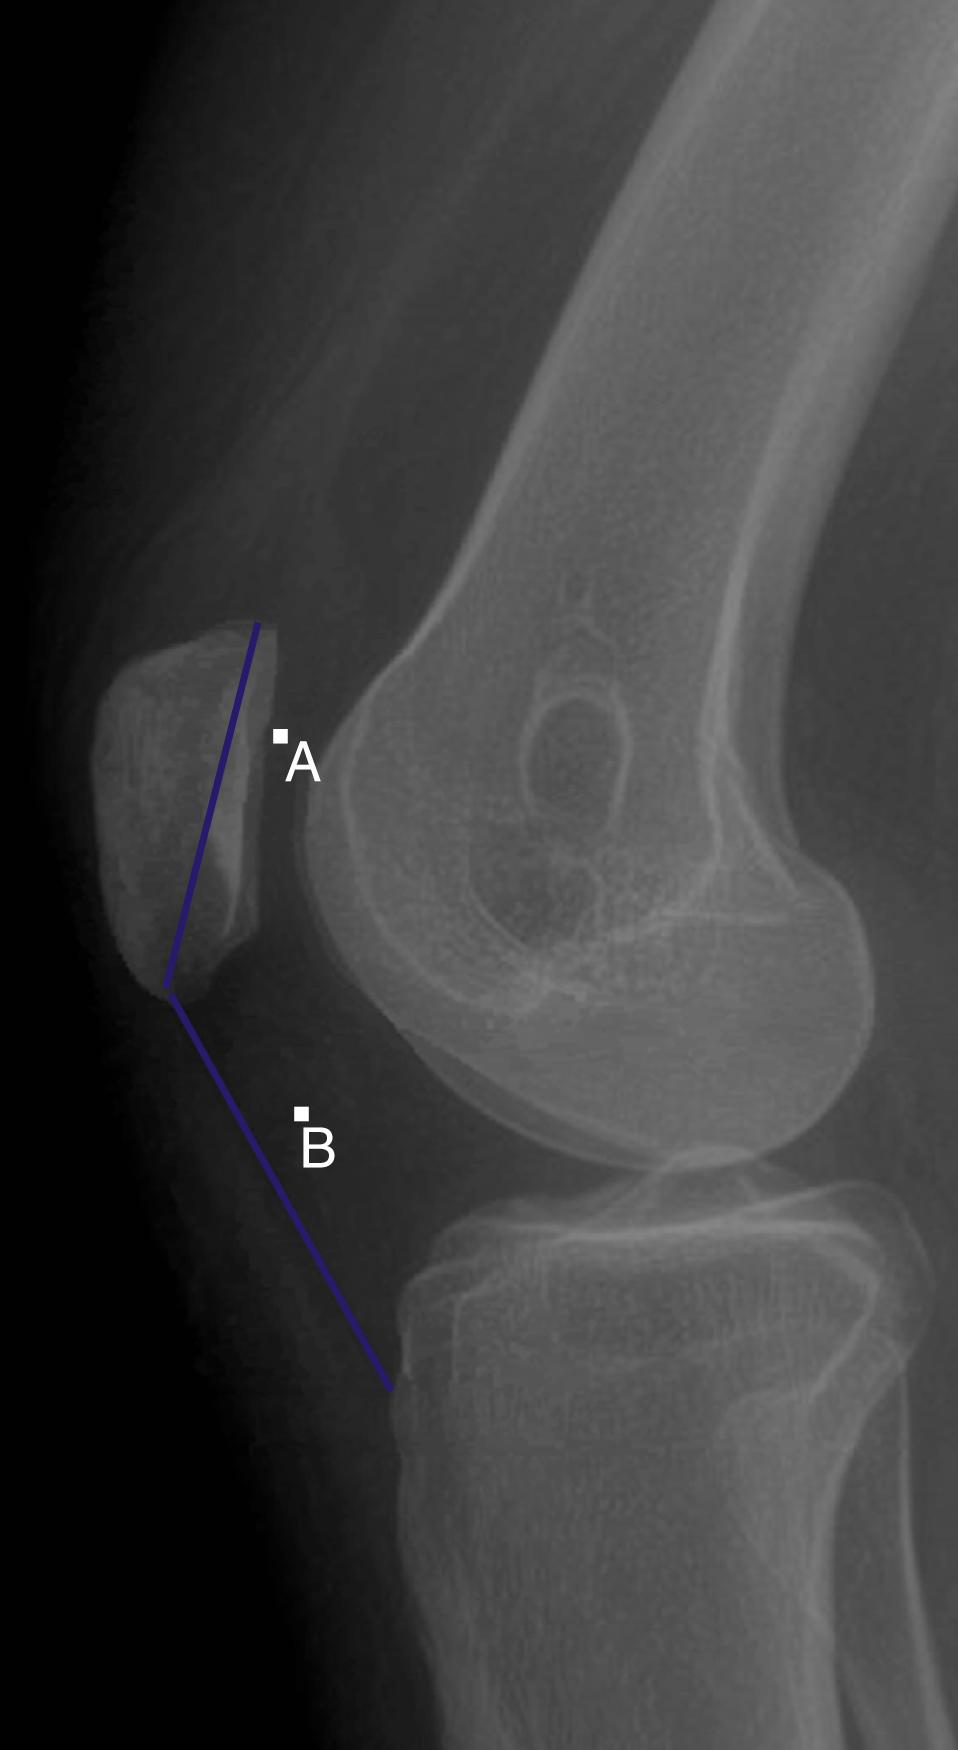 Fig. 30.1, The Insall-Salvati Index is calculated by dividing the length of the patella (line A) by the measurement of the length of the patella tendon (line B) on lateral radiograph.